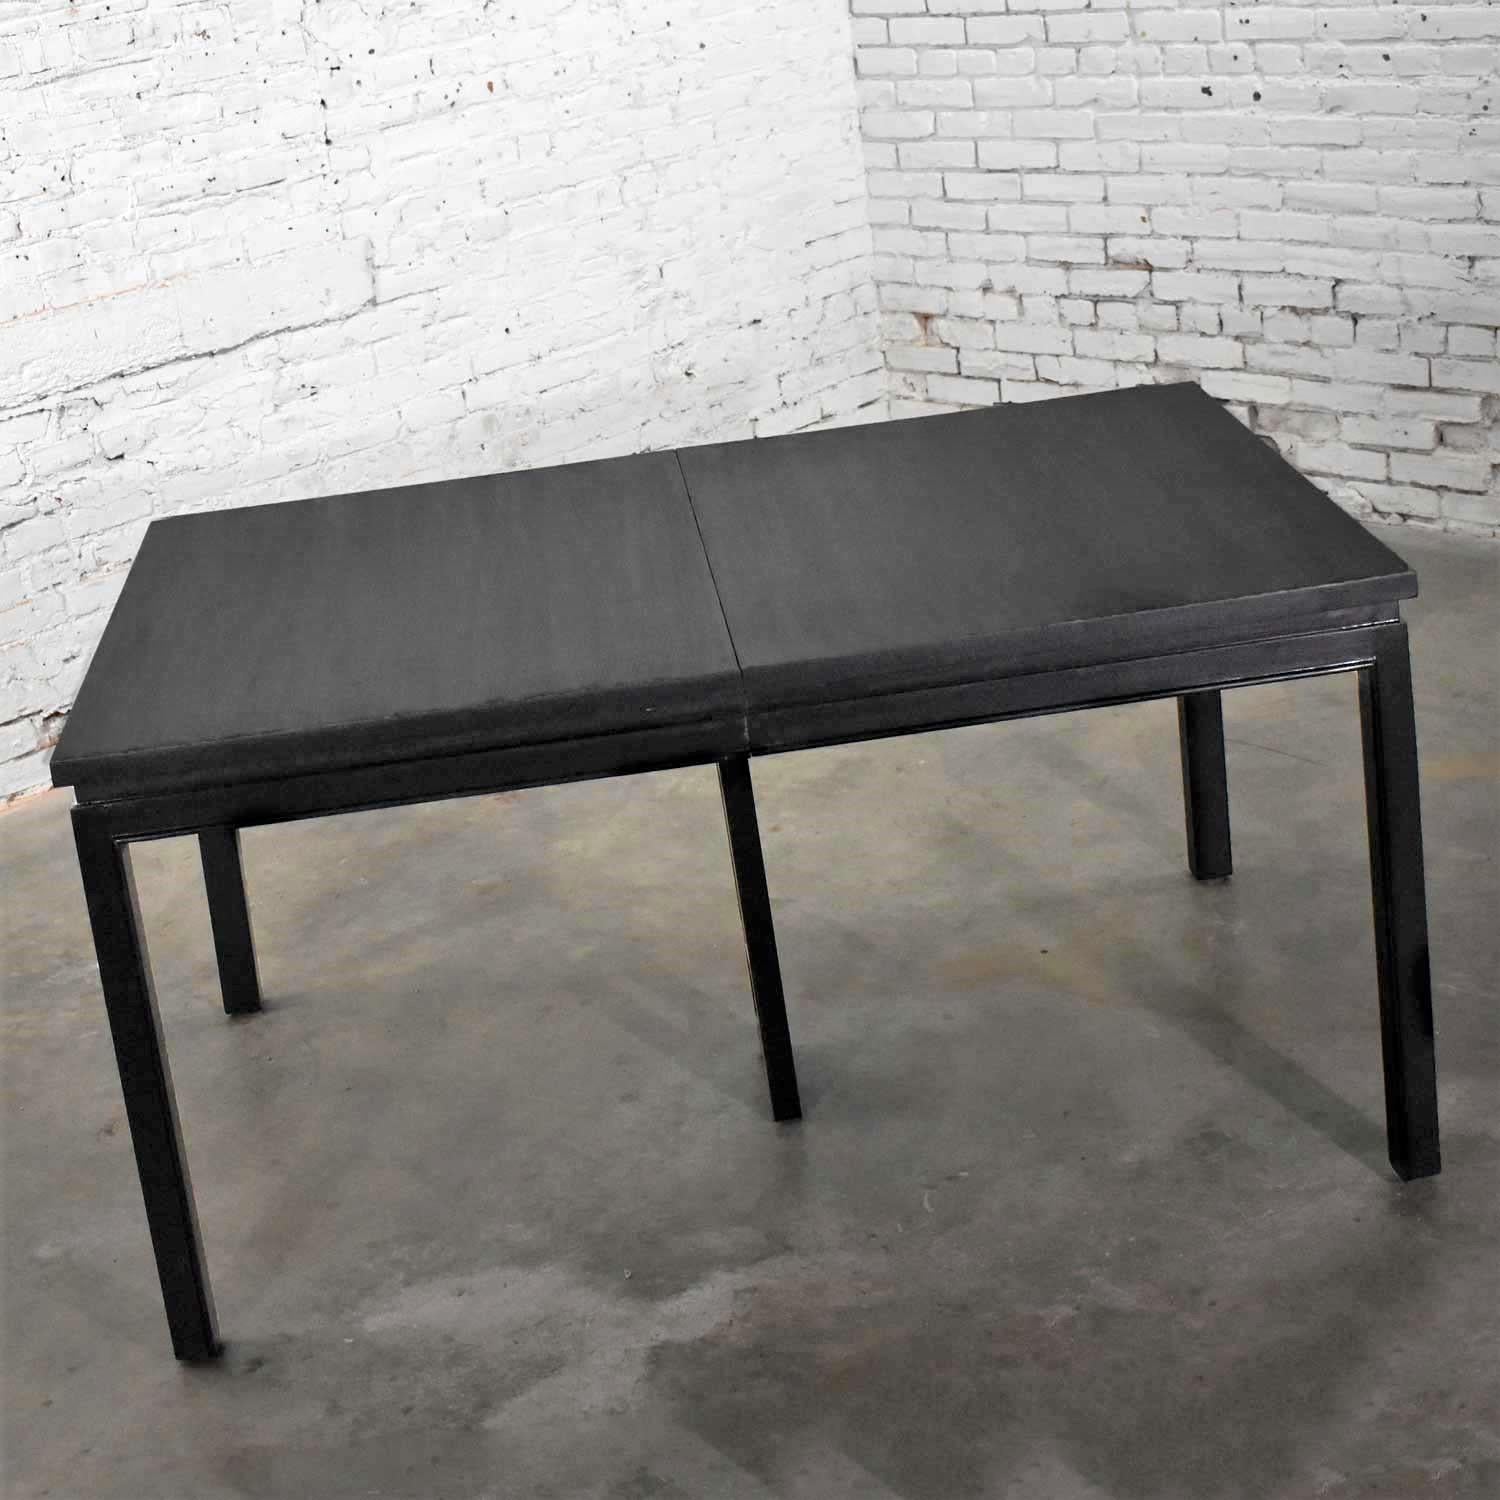 Handsome Asian Parson style extension dining table with a black dyed finish and two aproned leaves. This is a vintage Grand Rapids Bookcase and Chair Company table that we have refinished to a beautiful black. It is in ready to use condition. Please